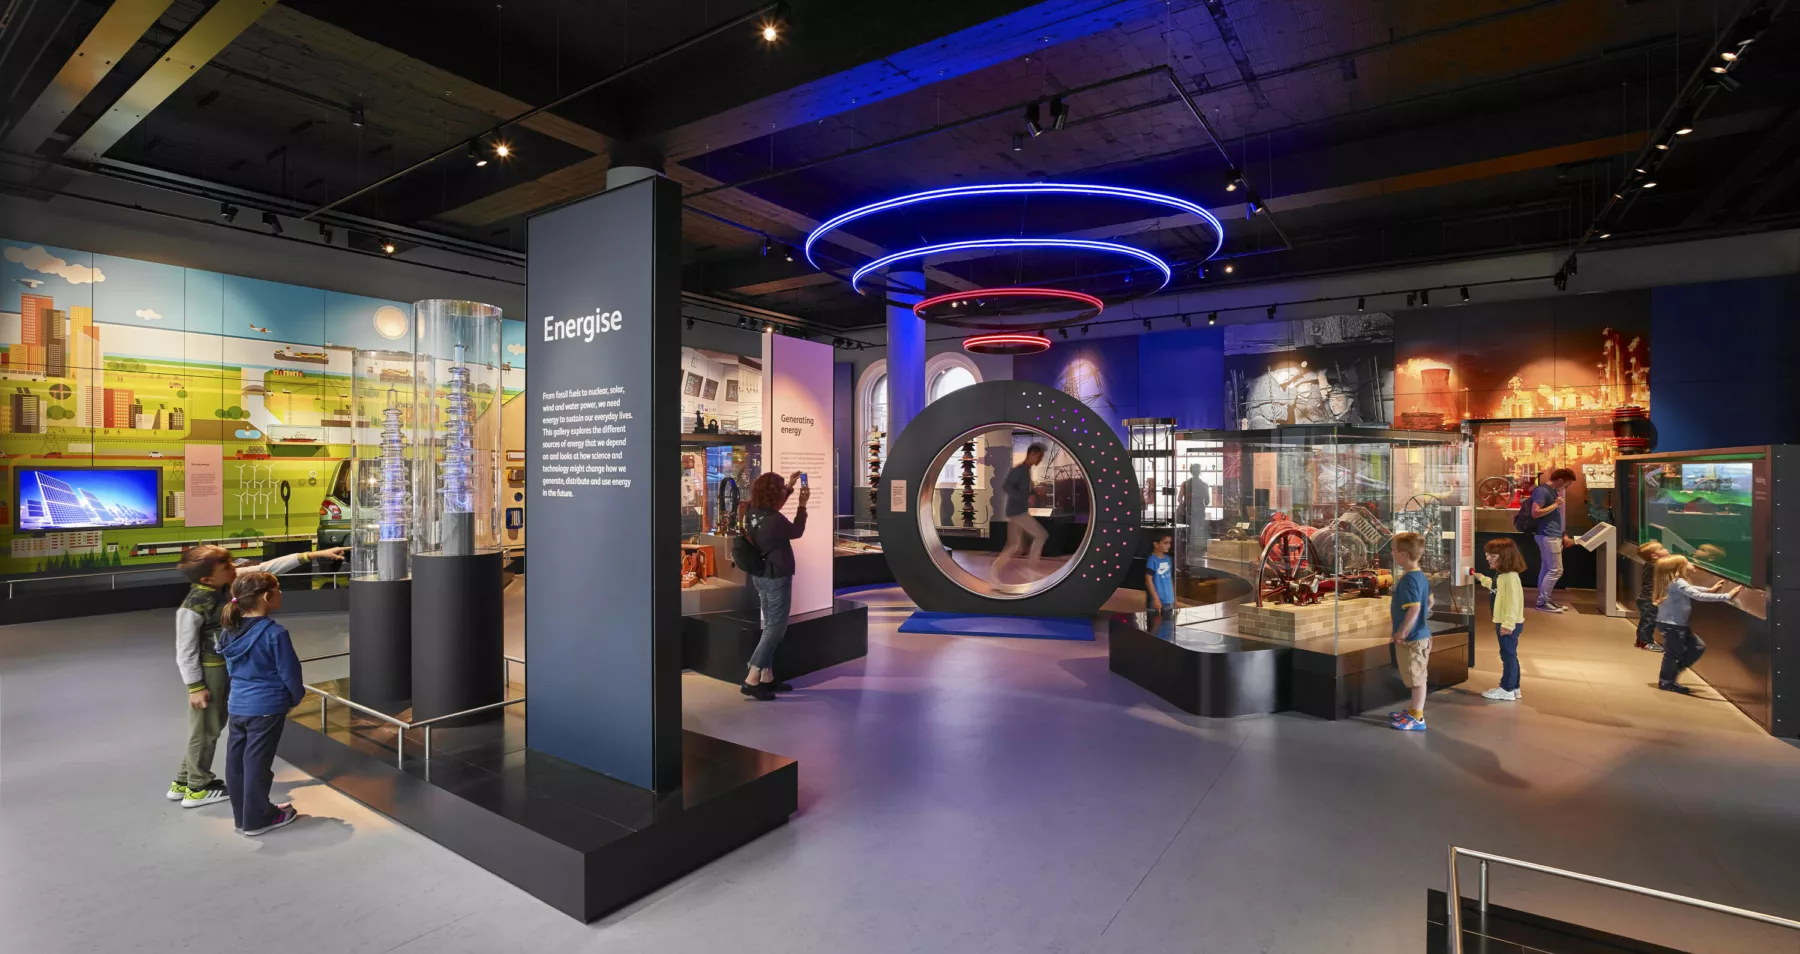 Interior view of one of the technology galleries at the National Museum of Scotland, Chambers Street, Edinburgh. Display showing how energy is made with children enjoying the exhibits and interactive areas.